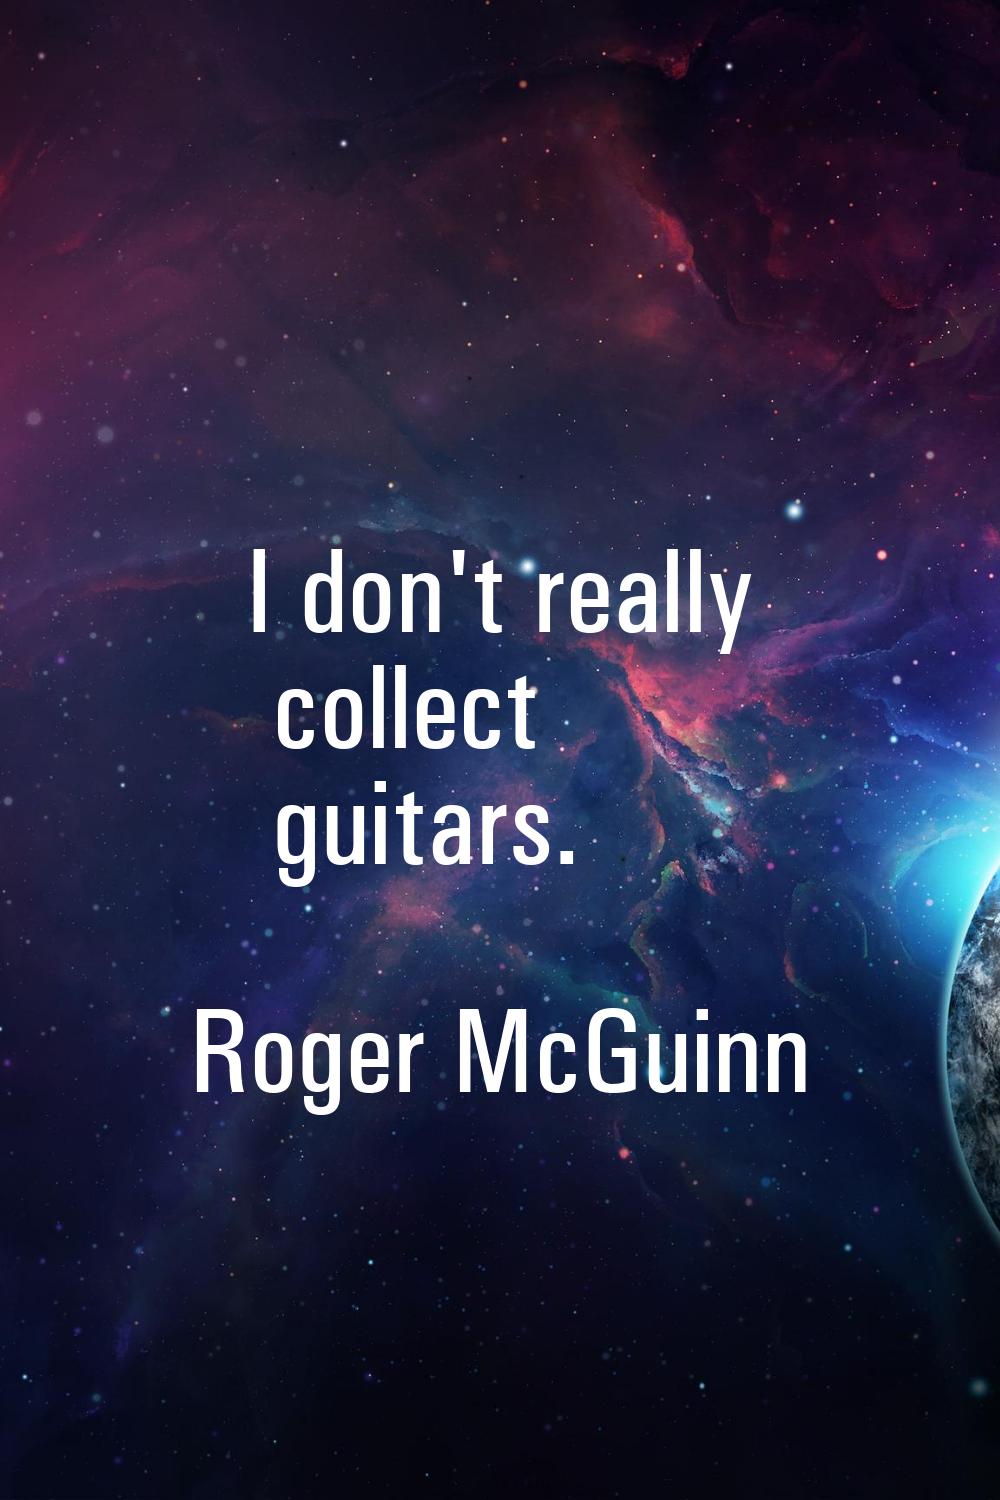 I don't really collect guitars.